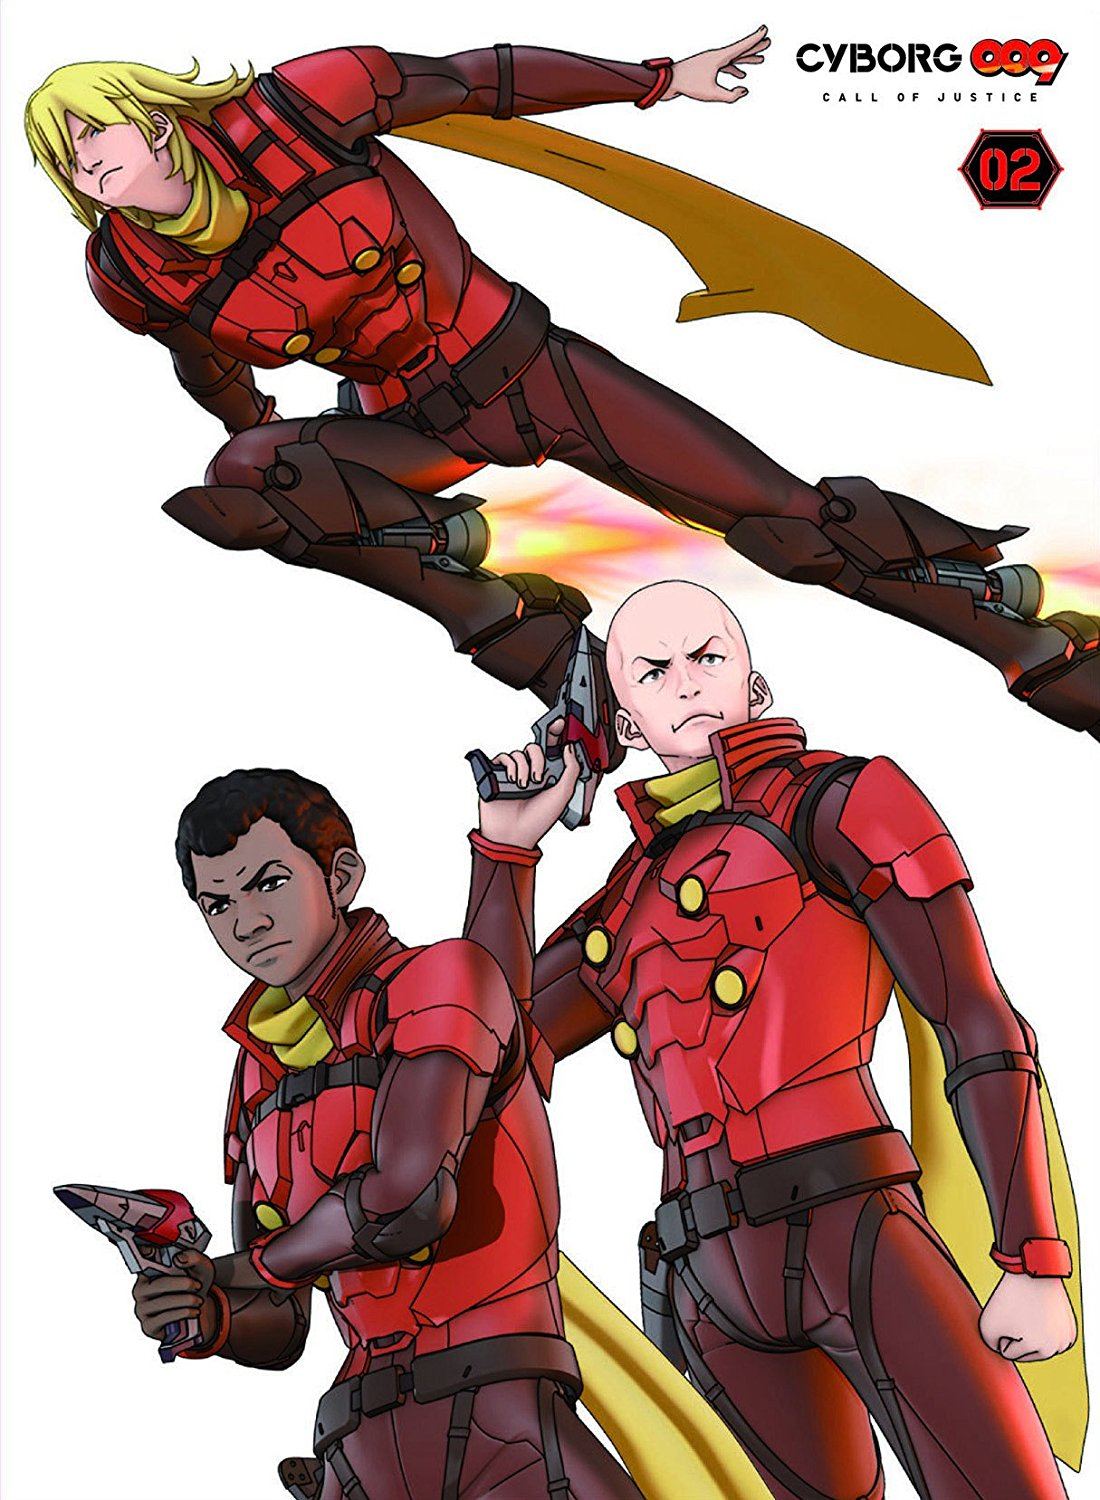 Cyborg009 Call Of Justice Vol.2